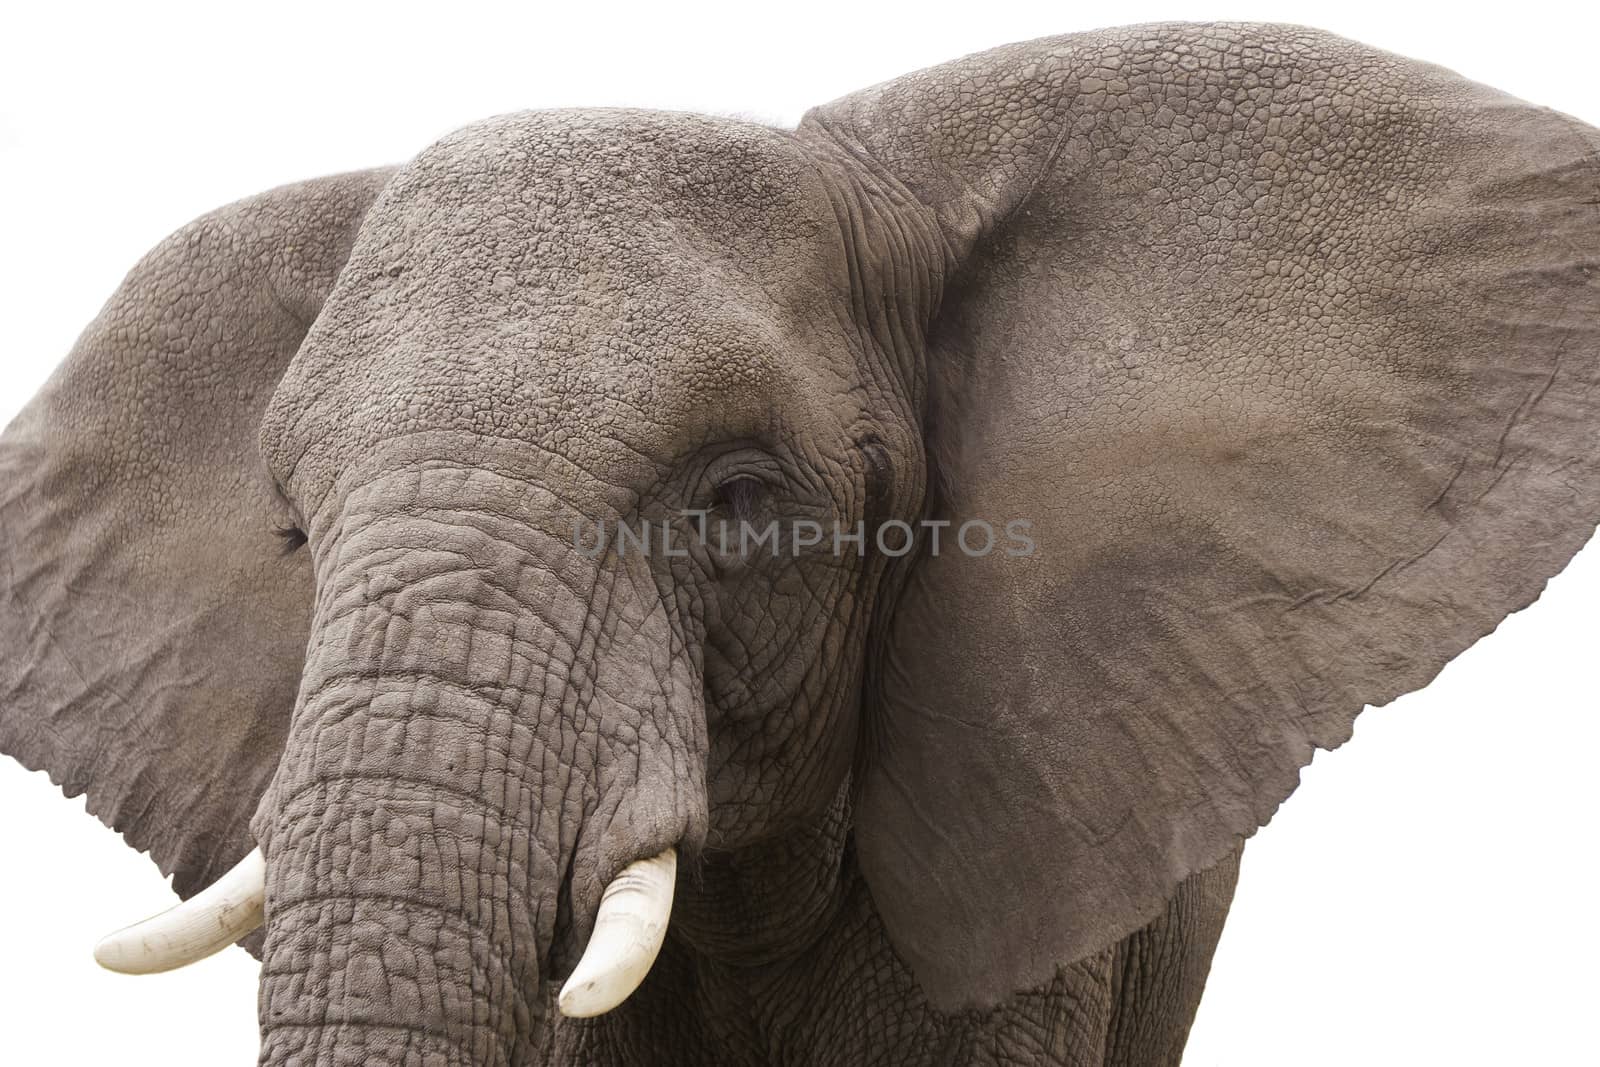 Wild African elephant isolated on a white background